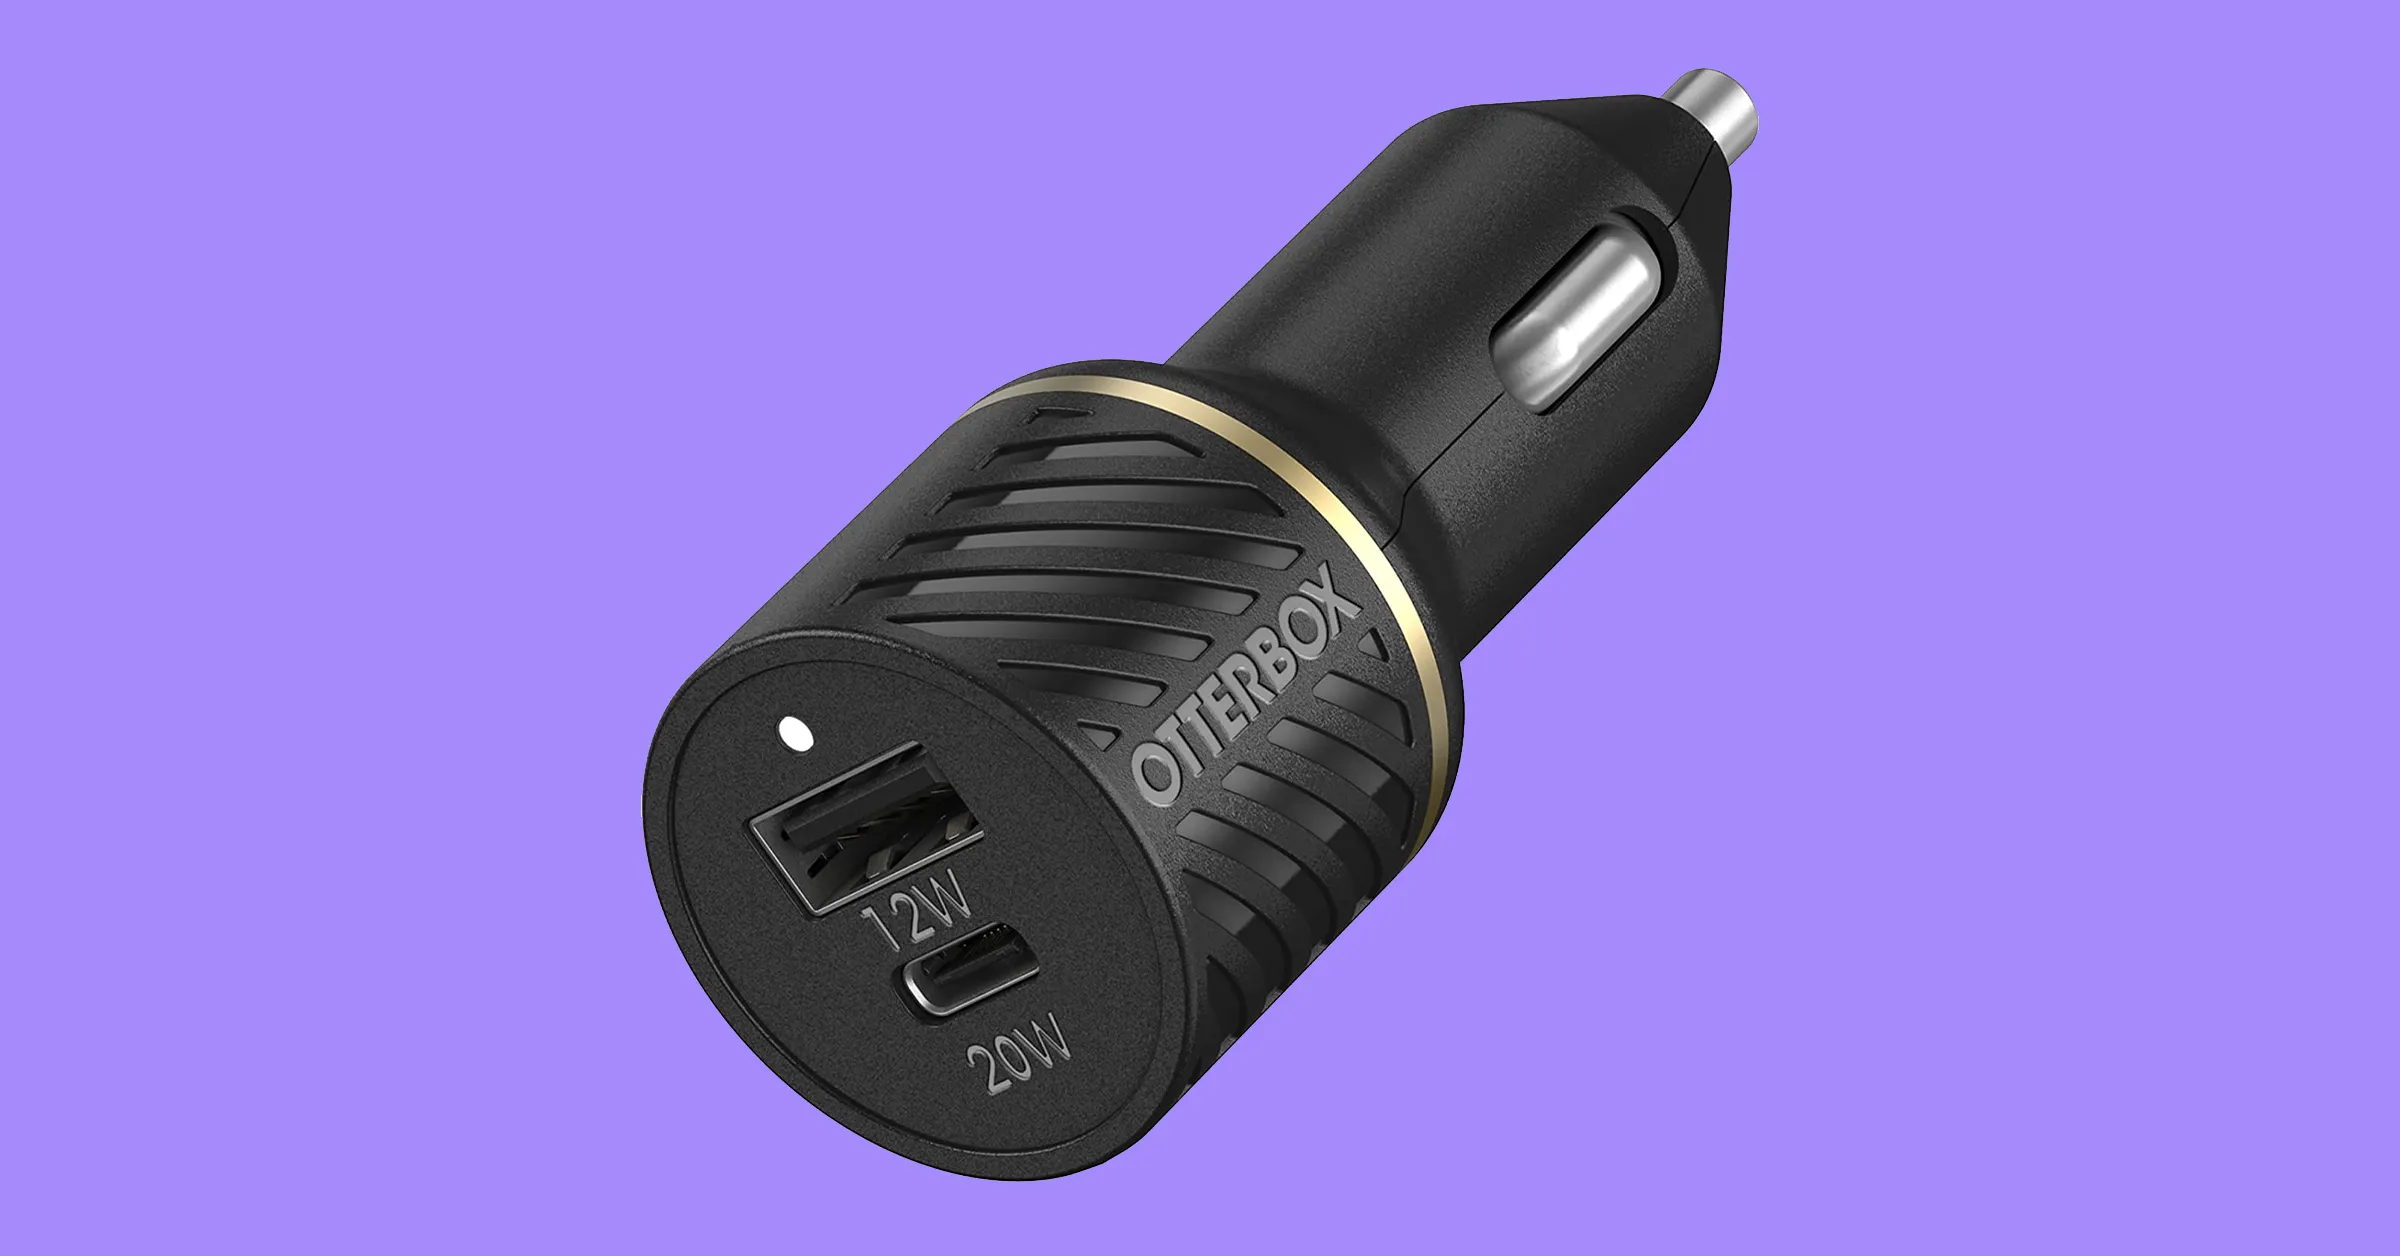 AILKIN 56W PD USB C Car Charger, Type-C Super Fast Power Charging